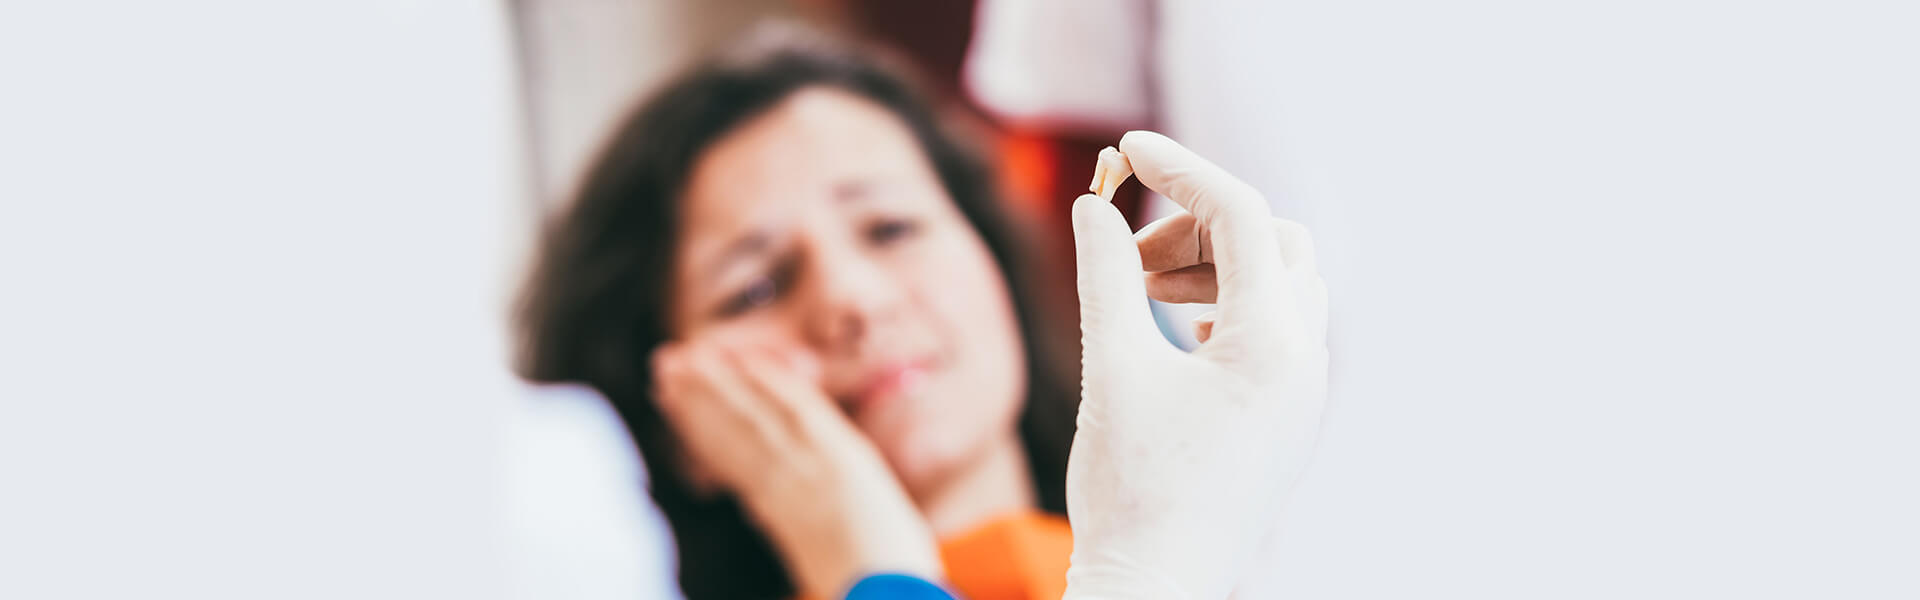 How Much Time Do You Need after Tooth Extractions to Become Pain-Free?